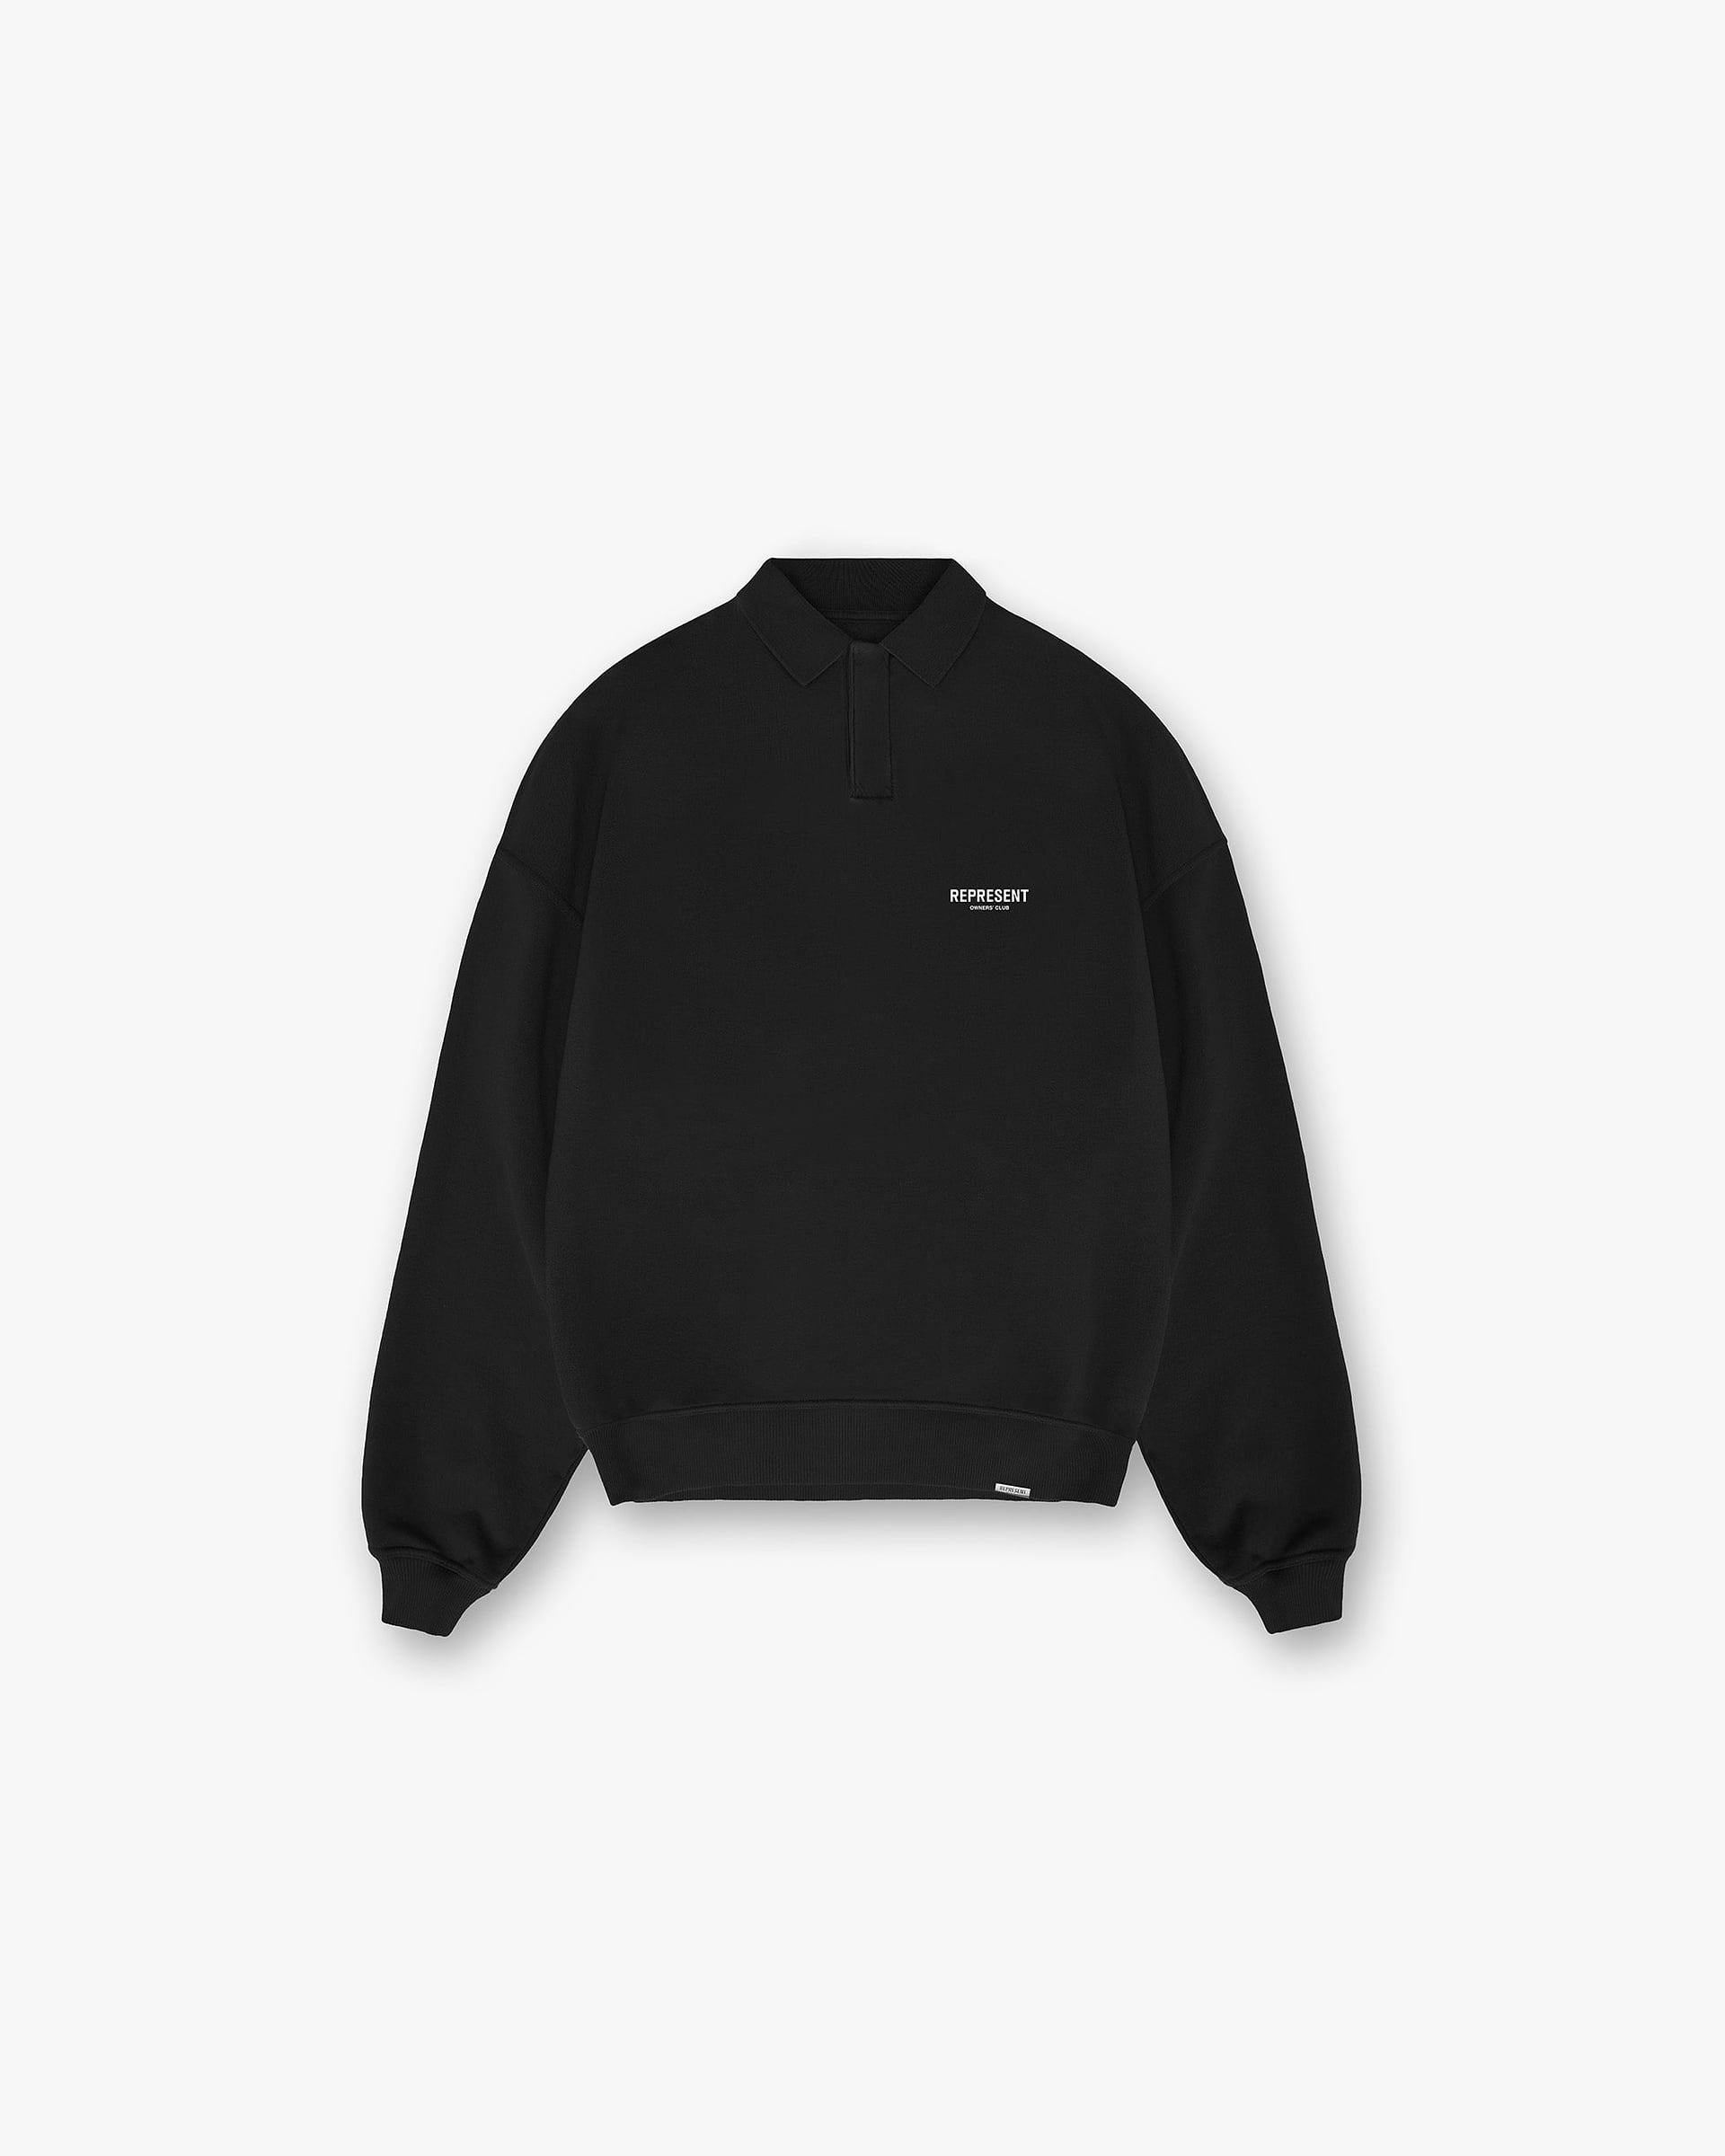 Represent Owners Club Long Sleeve Polo Sweater | Black Sweaters Owners Club | Represent Clo